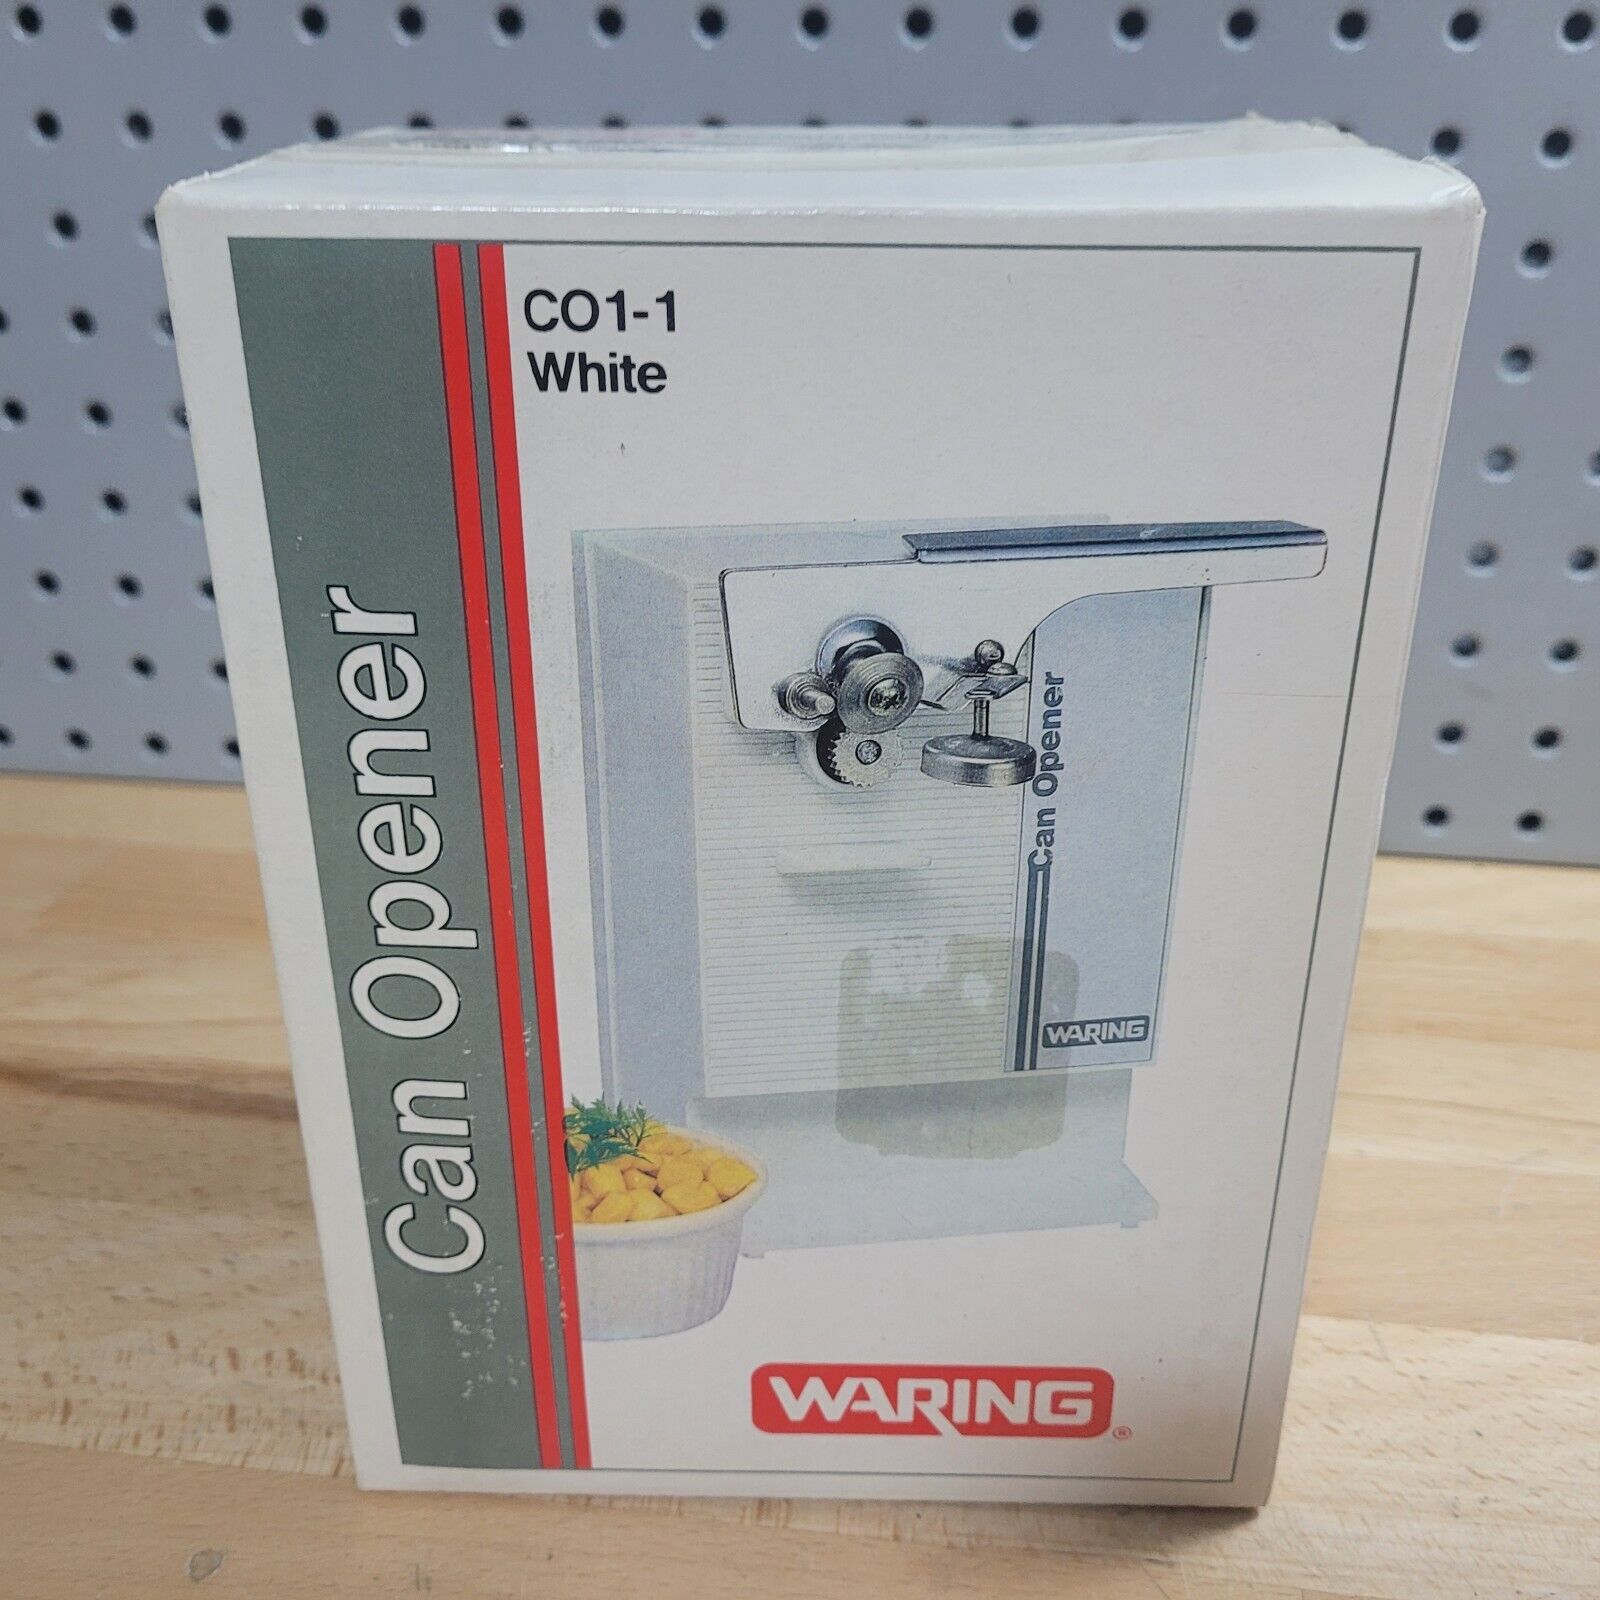 Vintage WARING Can Opener C01-1 electric opener *NEW IN SEALED BOX*